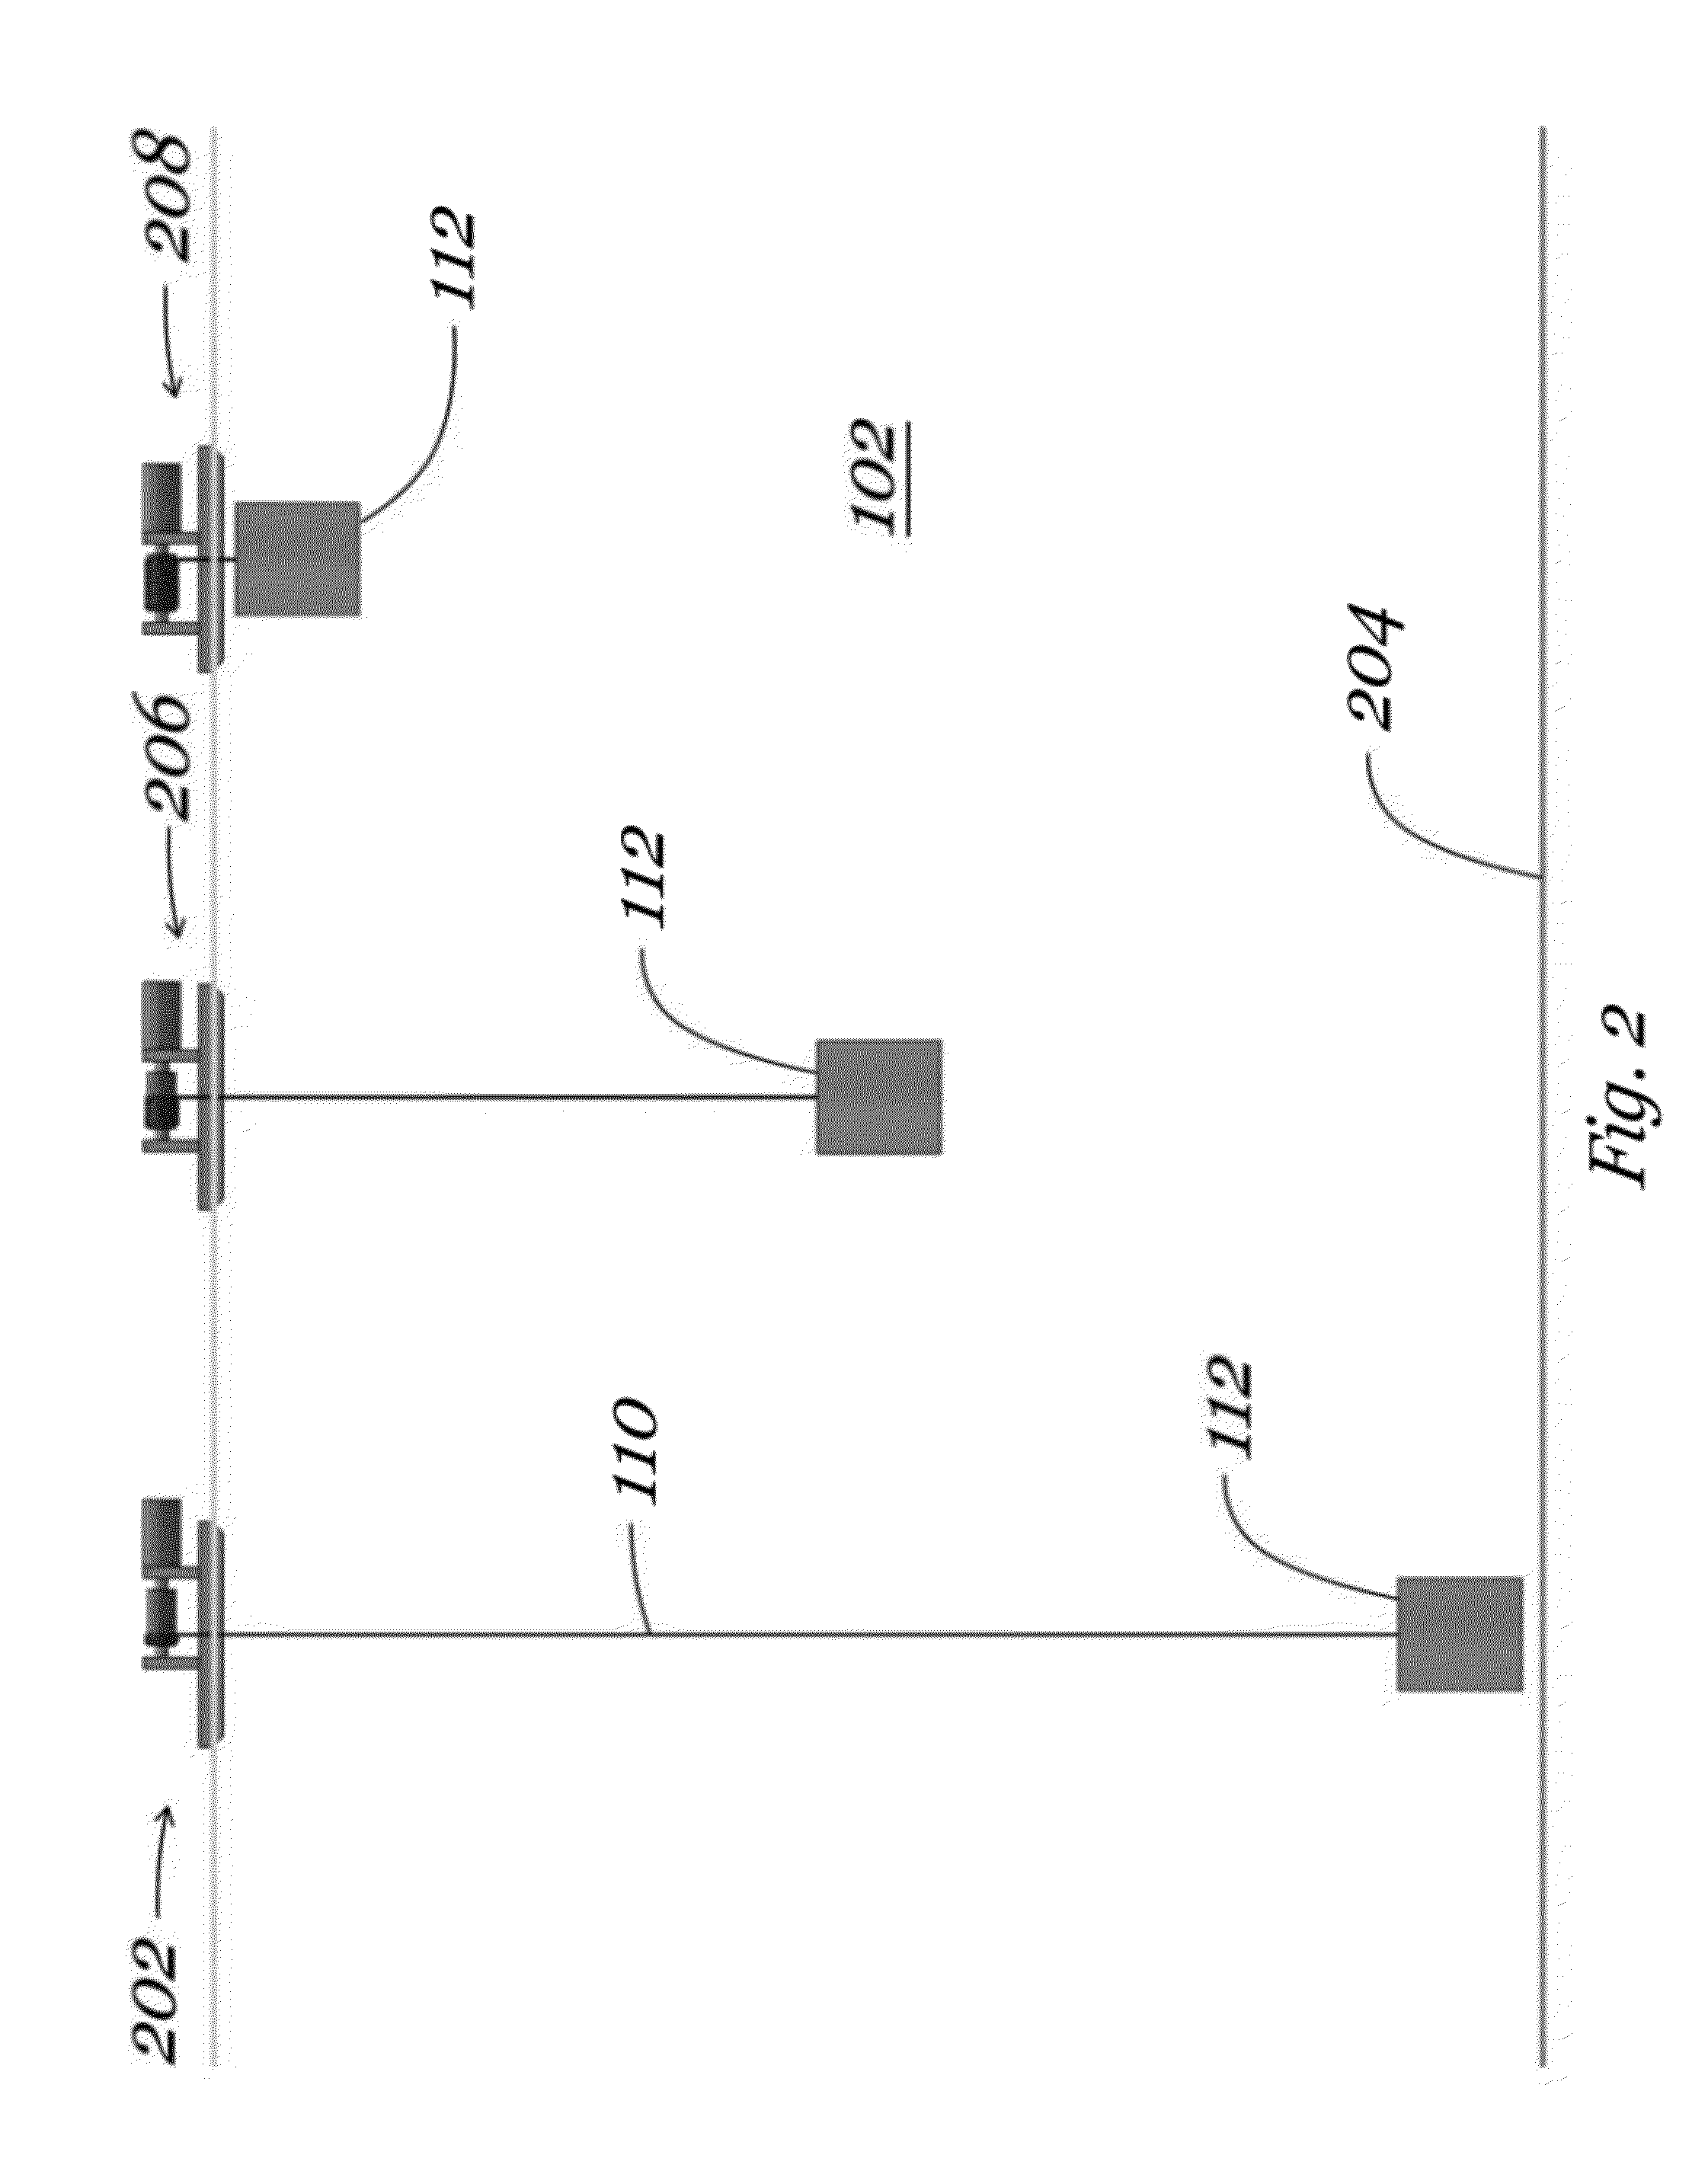 Energy Storage Devices and Methods of Using Same